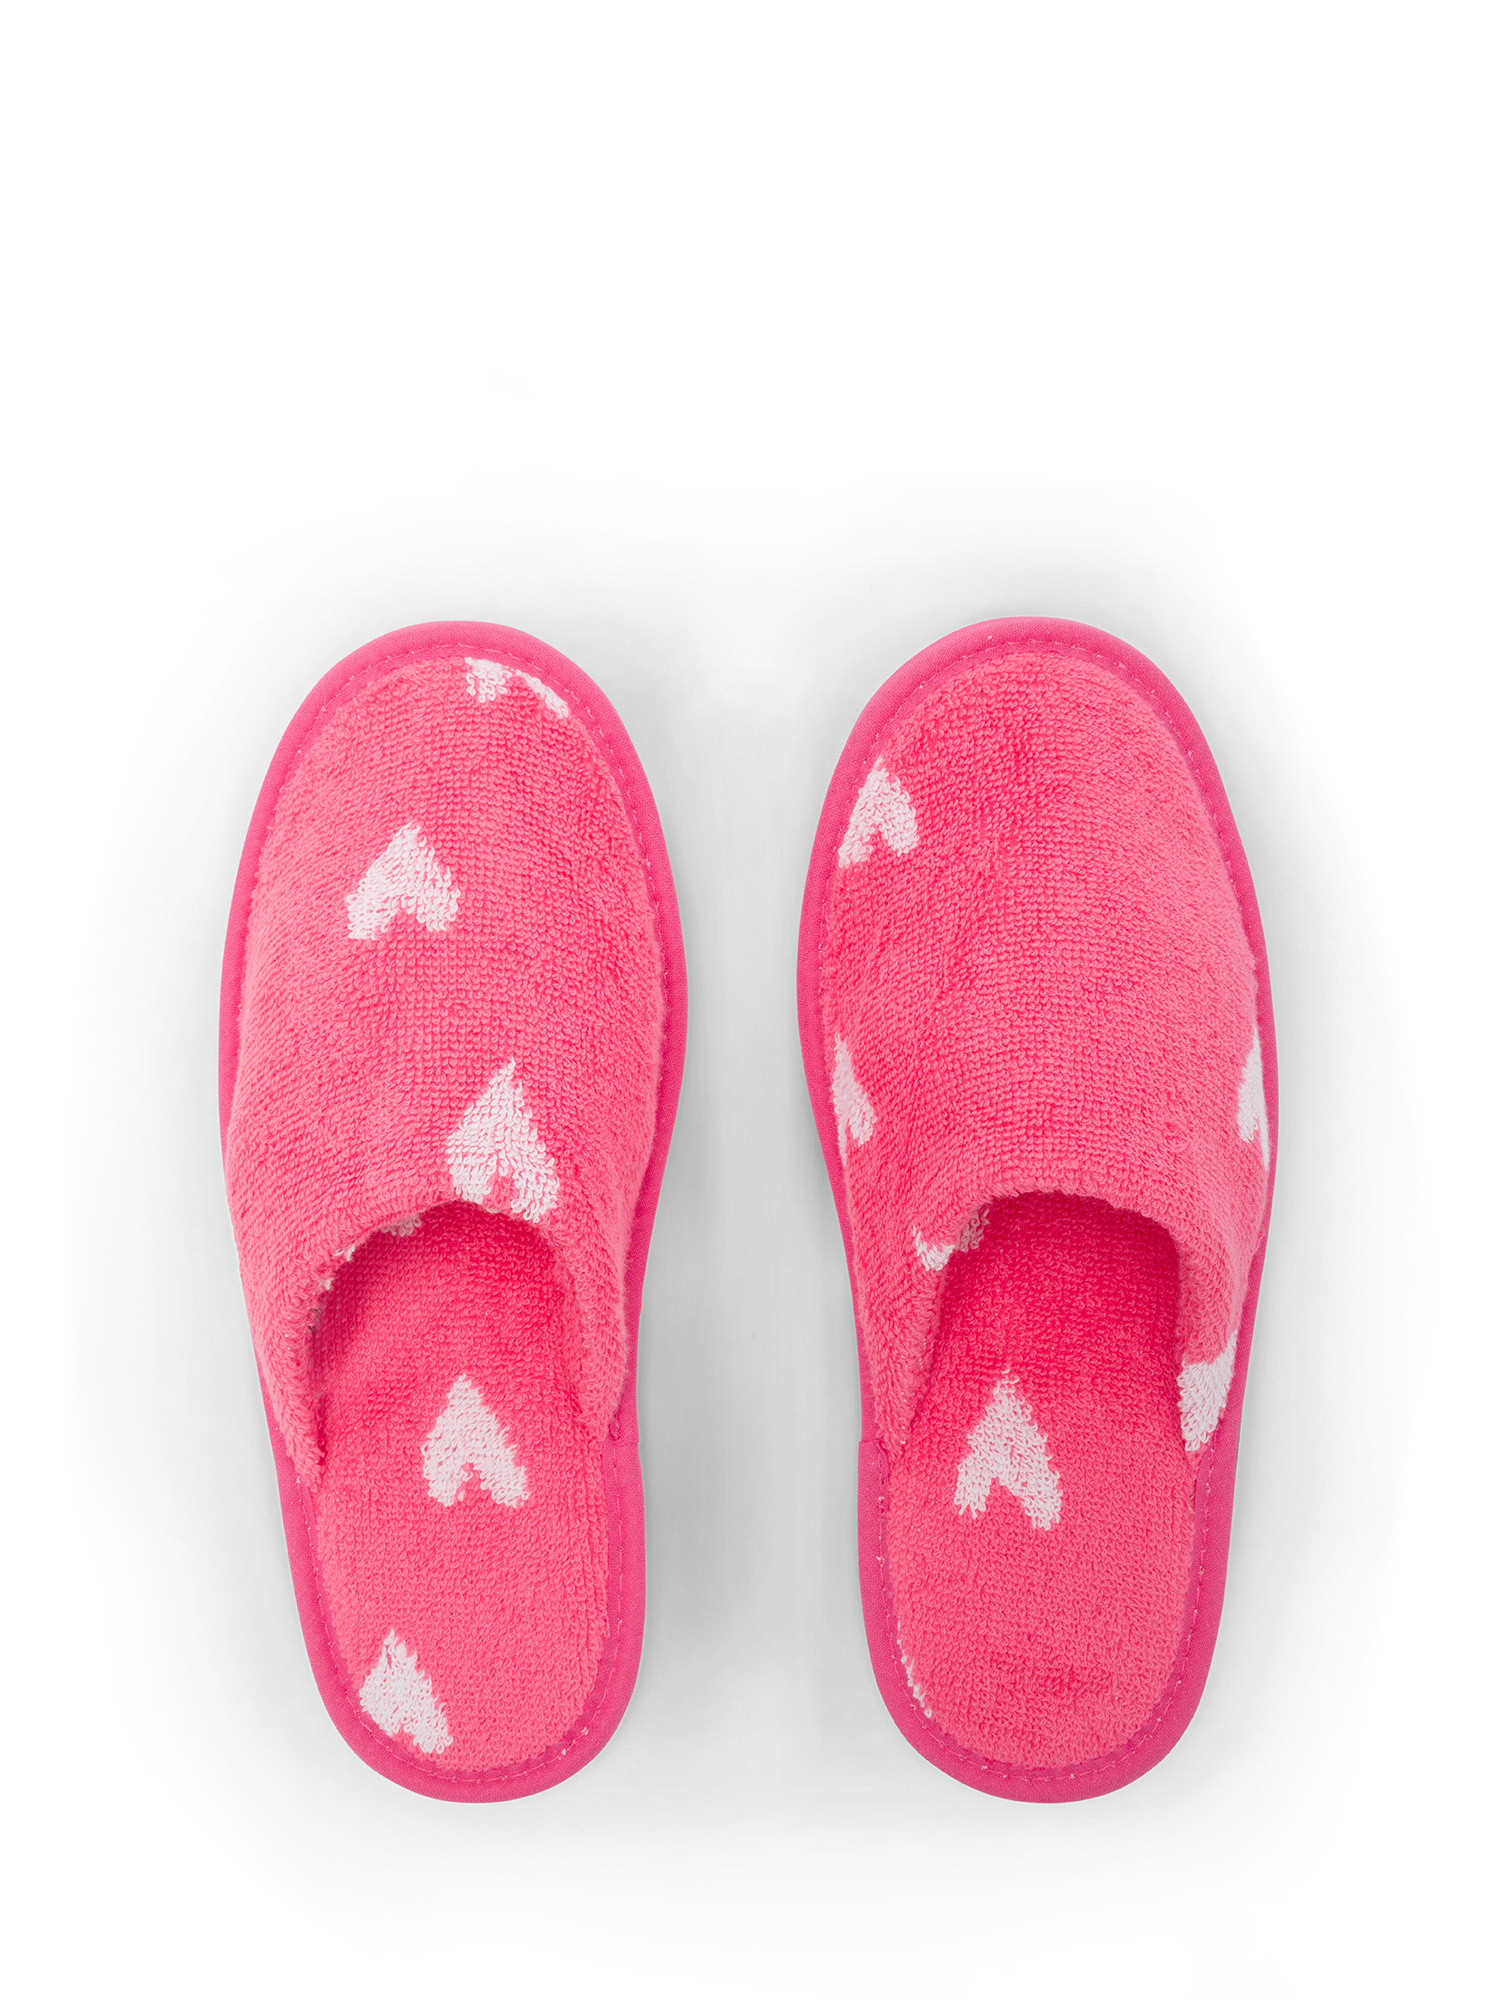 Cotton terry slippers with little hearts motif, Pink, large image number 0